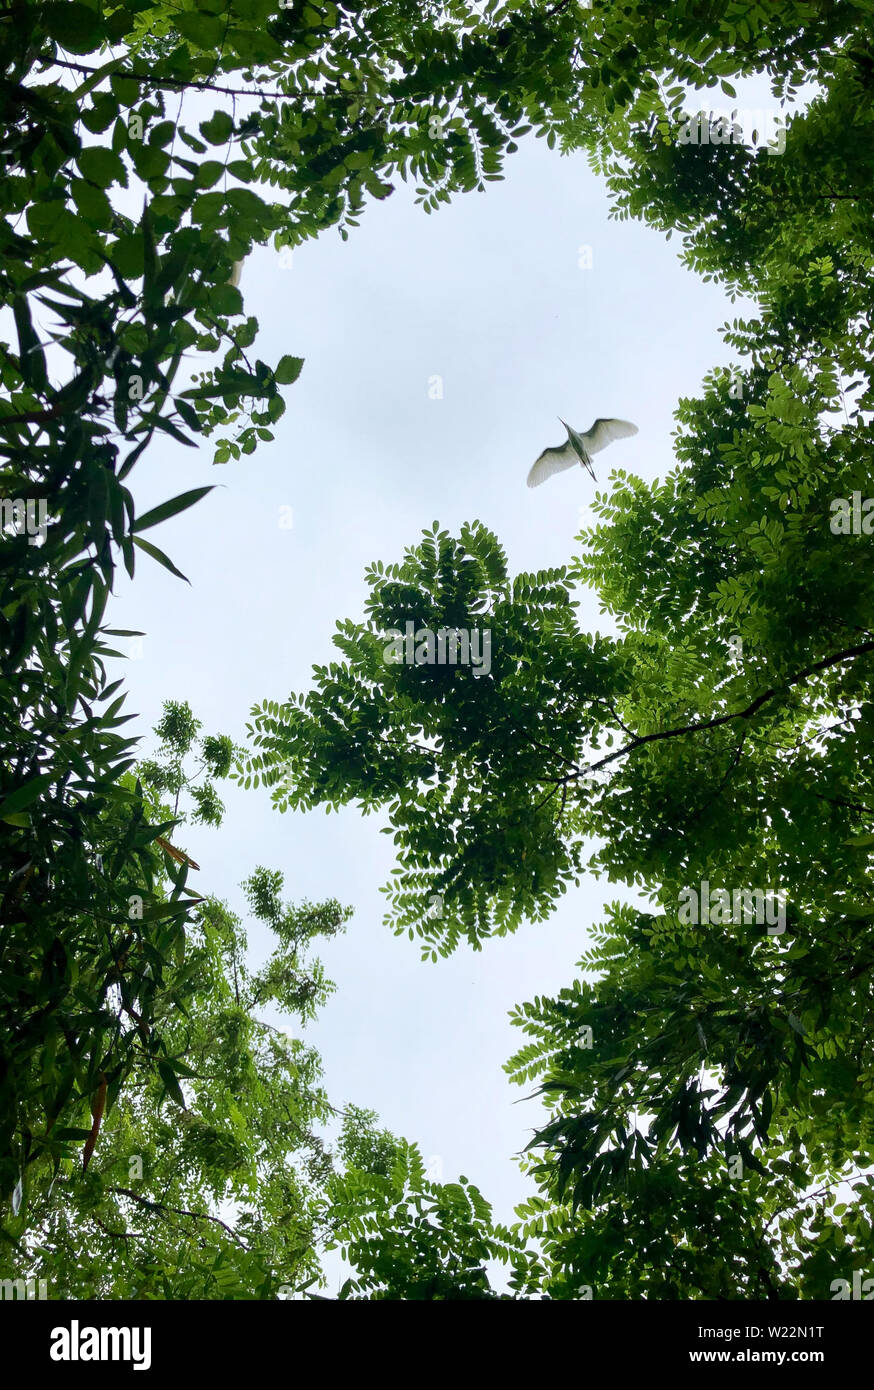 (190705) -- NANJING, July 5, 2019 (Xinhua) -- An egret flies over trees at the Dafeng Milu National Nature Reserve in the city of Yancheng, east China's Jiangsu Province, June 26, 2019. China's Migratory Bird Sanctuaries along the coast of the Yellow Sea-Bohai Gulf (Phase I) were inscribed on the World Heritage List as a natural site on Friday at the ongoing 43rd session of the UNESCO World Heritage Committee in Azerbaijan's capital of Baku.    Migratory Bird Sanctuaries along the coast of the Yellow Sea-Bohai Gulf of China are located in the Yellow Sea ecoregion, containing the world's larges Stock Photo